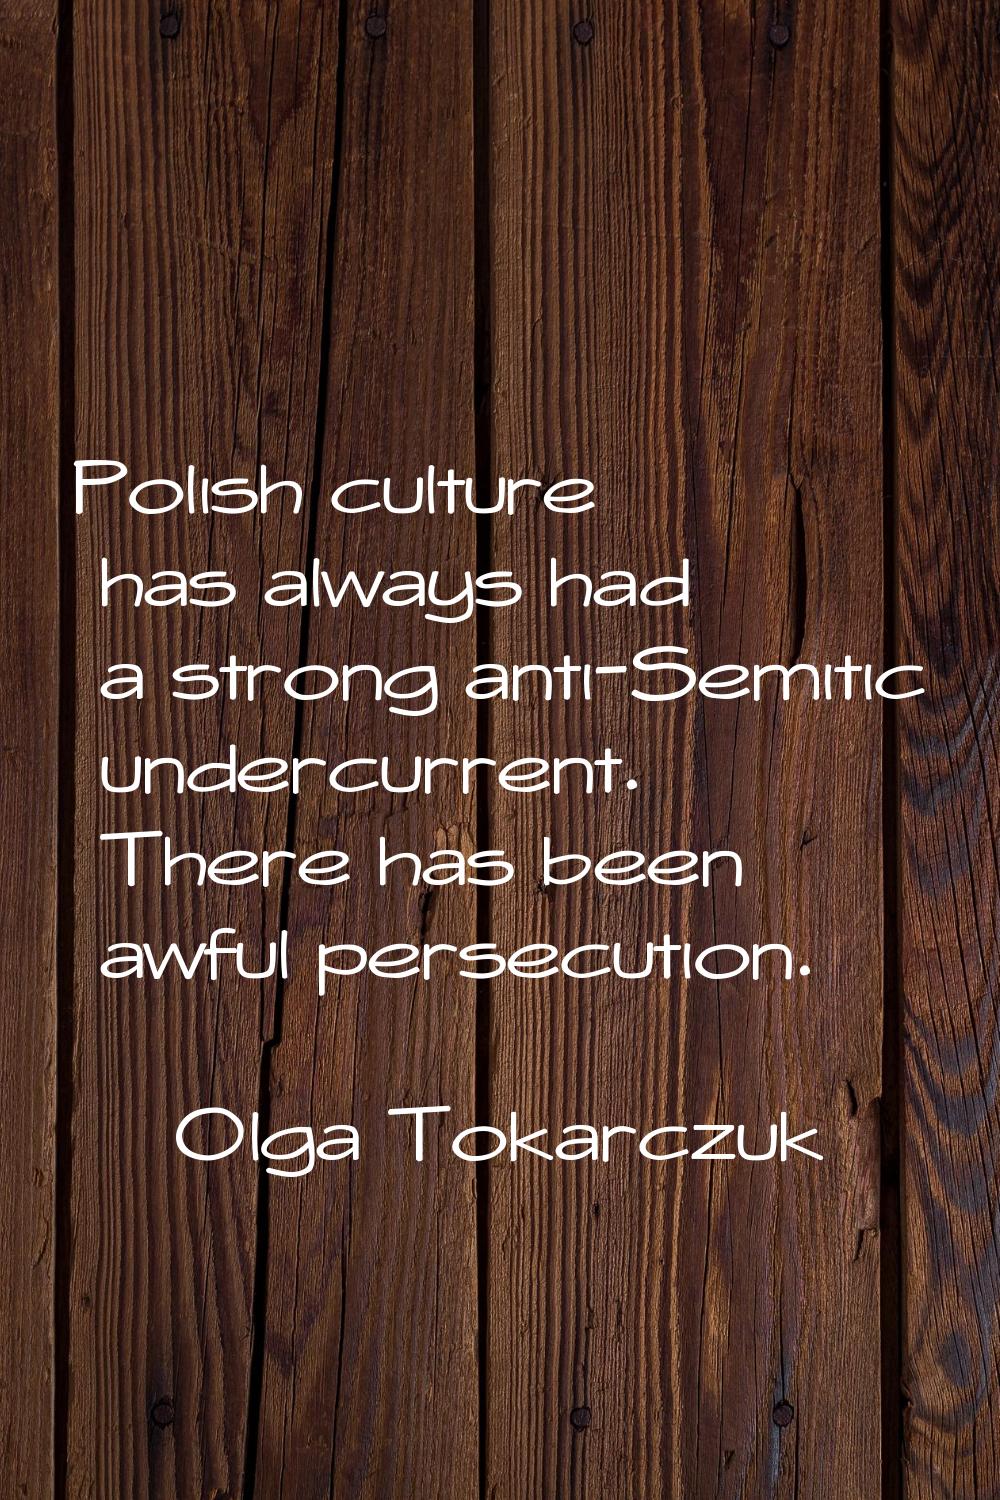 Polish culture has always had a strong anti-Semitic undercurrent. There has been awful persecution.